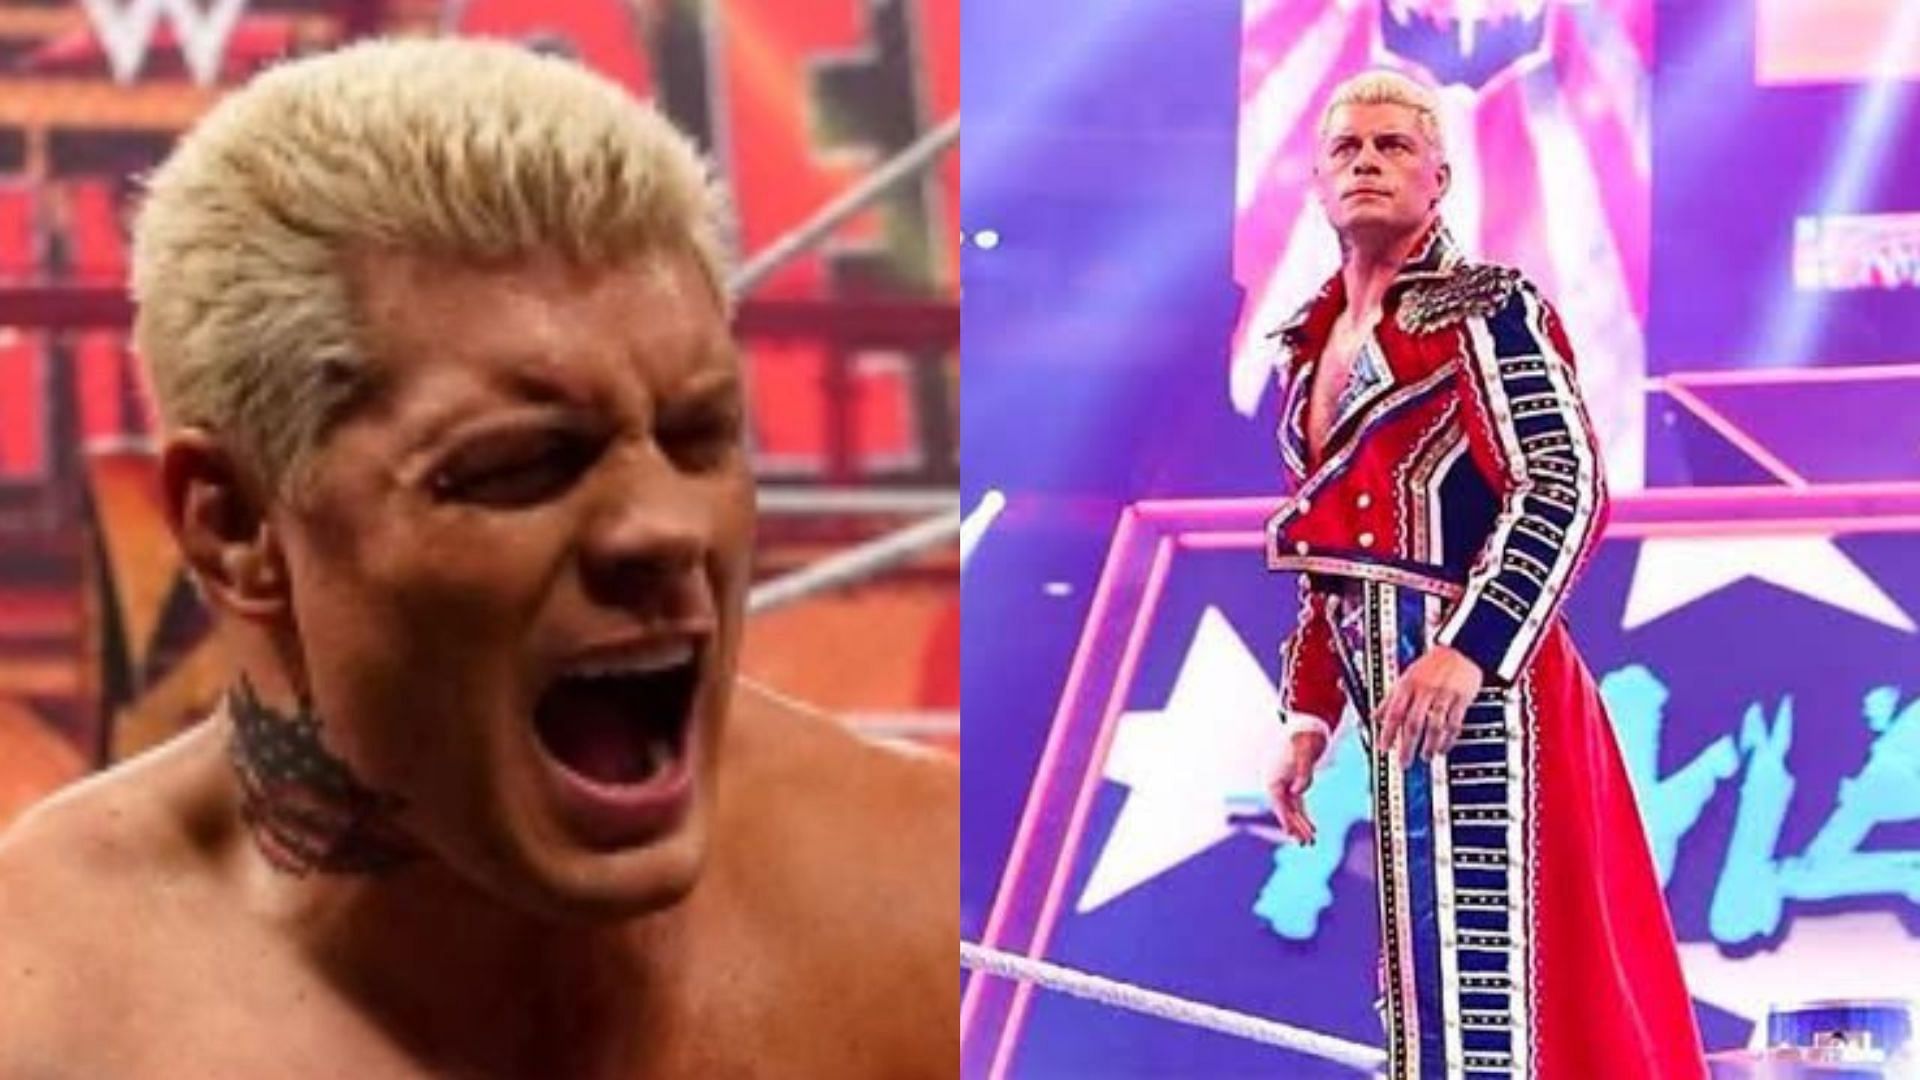 Cody Rhodes competed with a torn pectoral muscle at the Hell in a Cell 2022 show